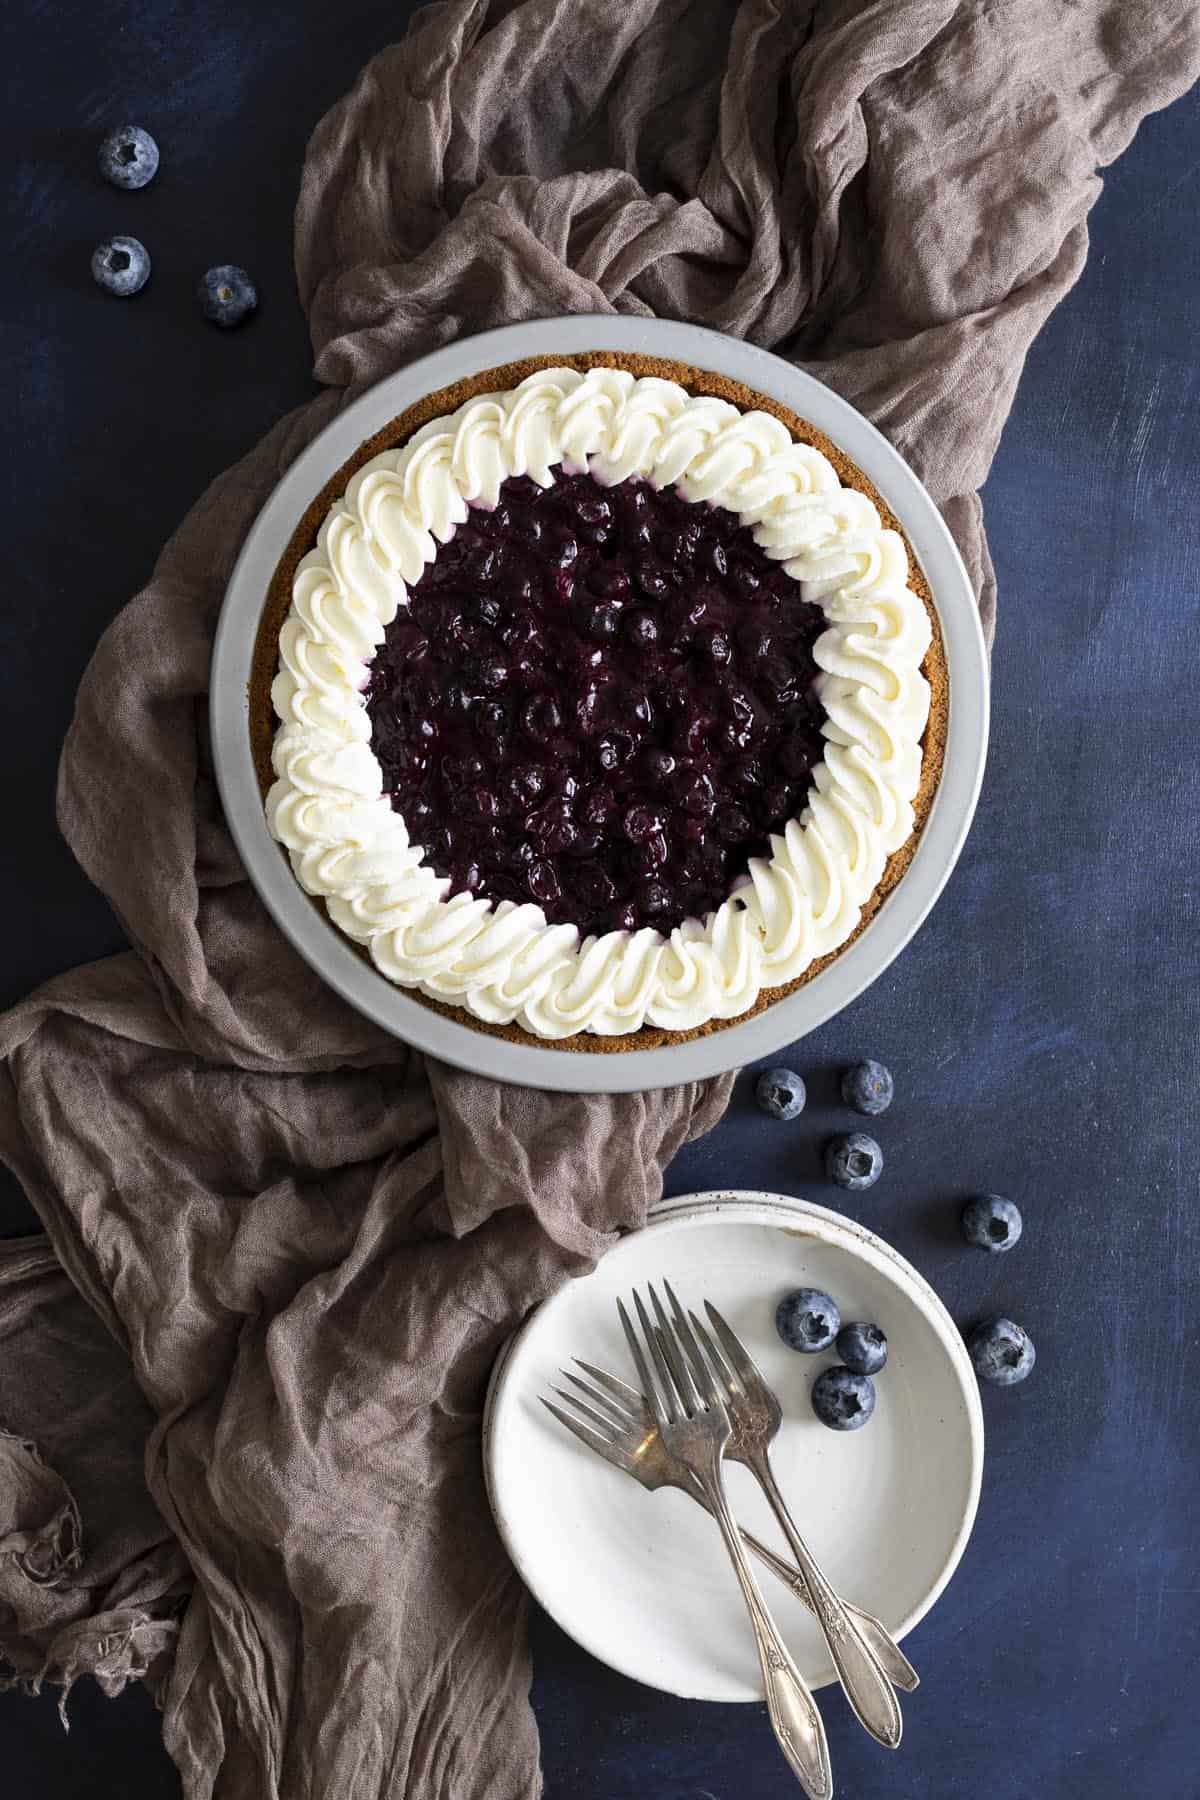 A no bake blueberry pie with Graham cracker crust next to a stack of white plates.